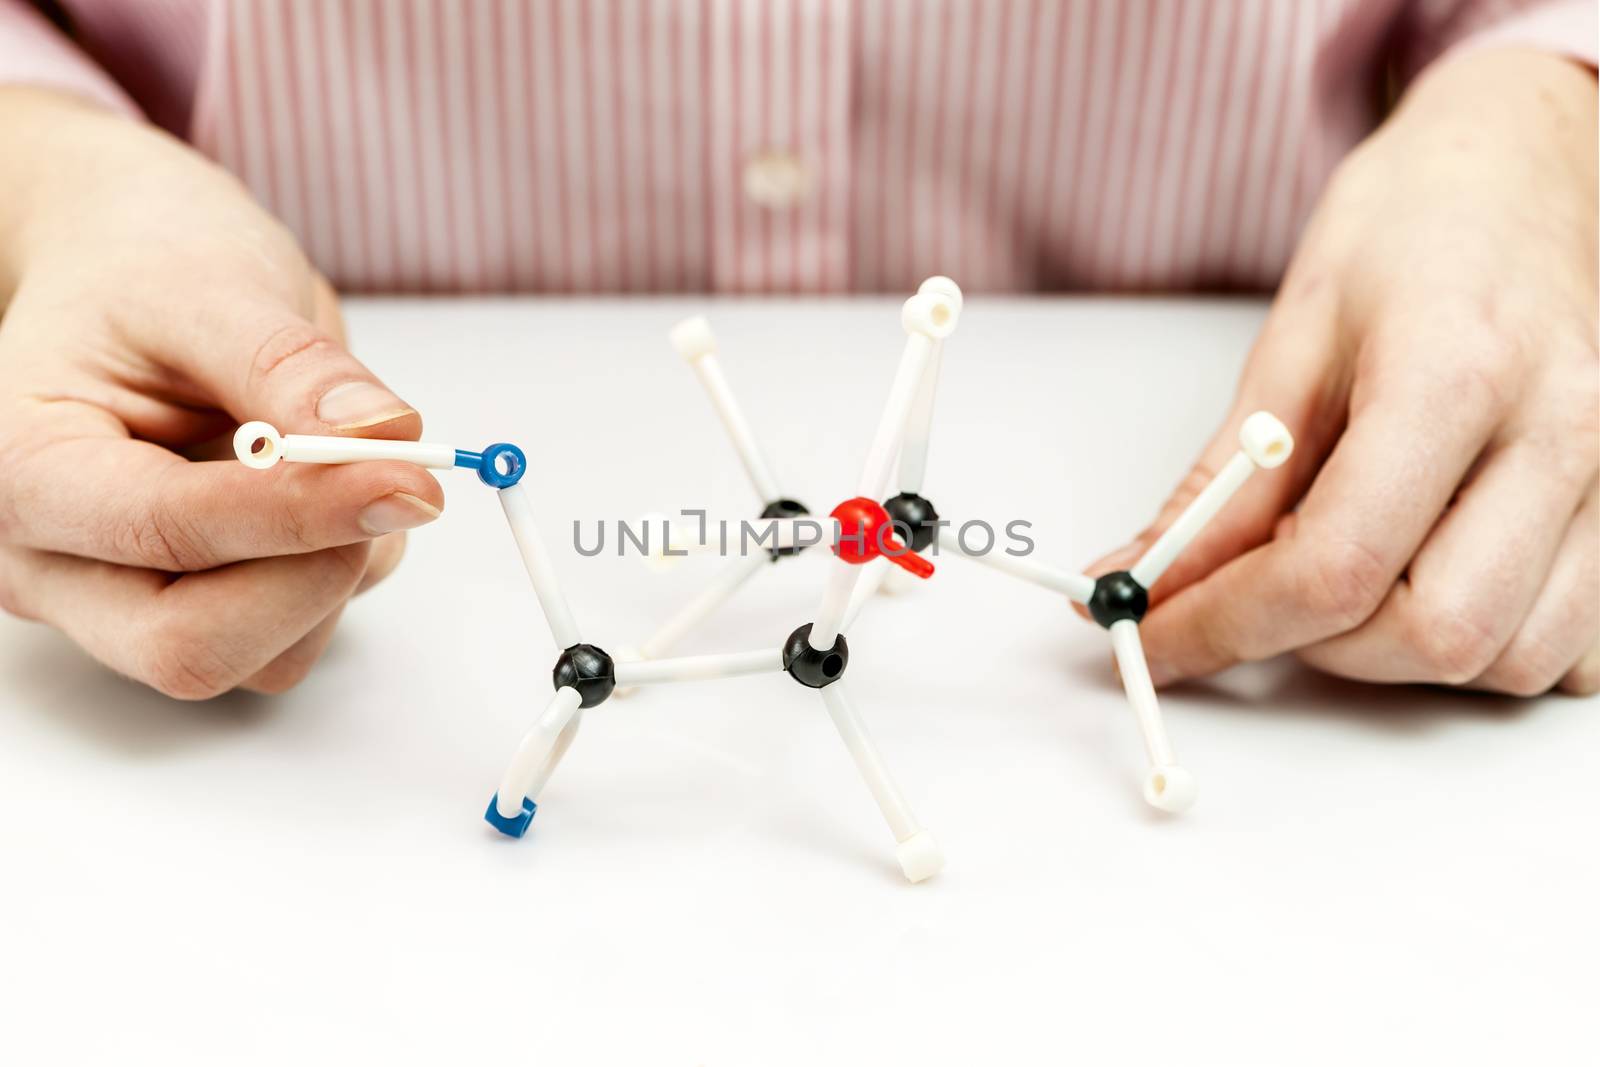 Hand of female student assembling amino acid molecule models for science project